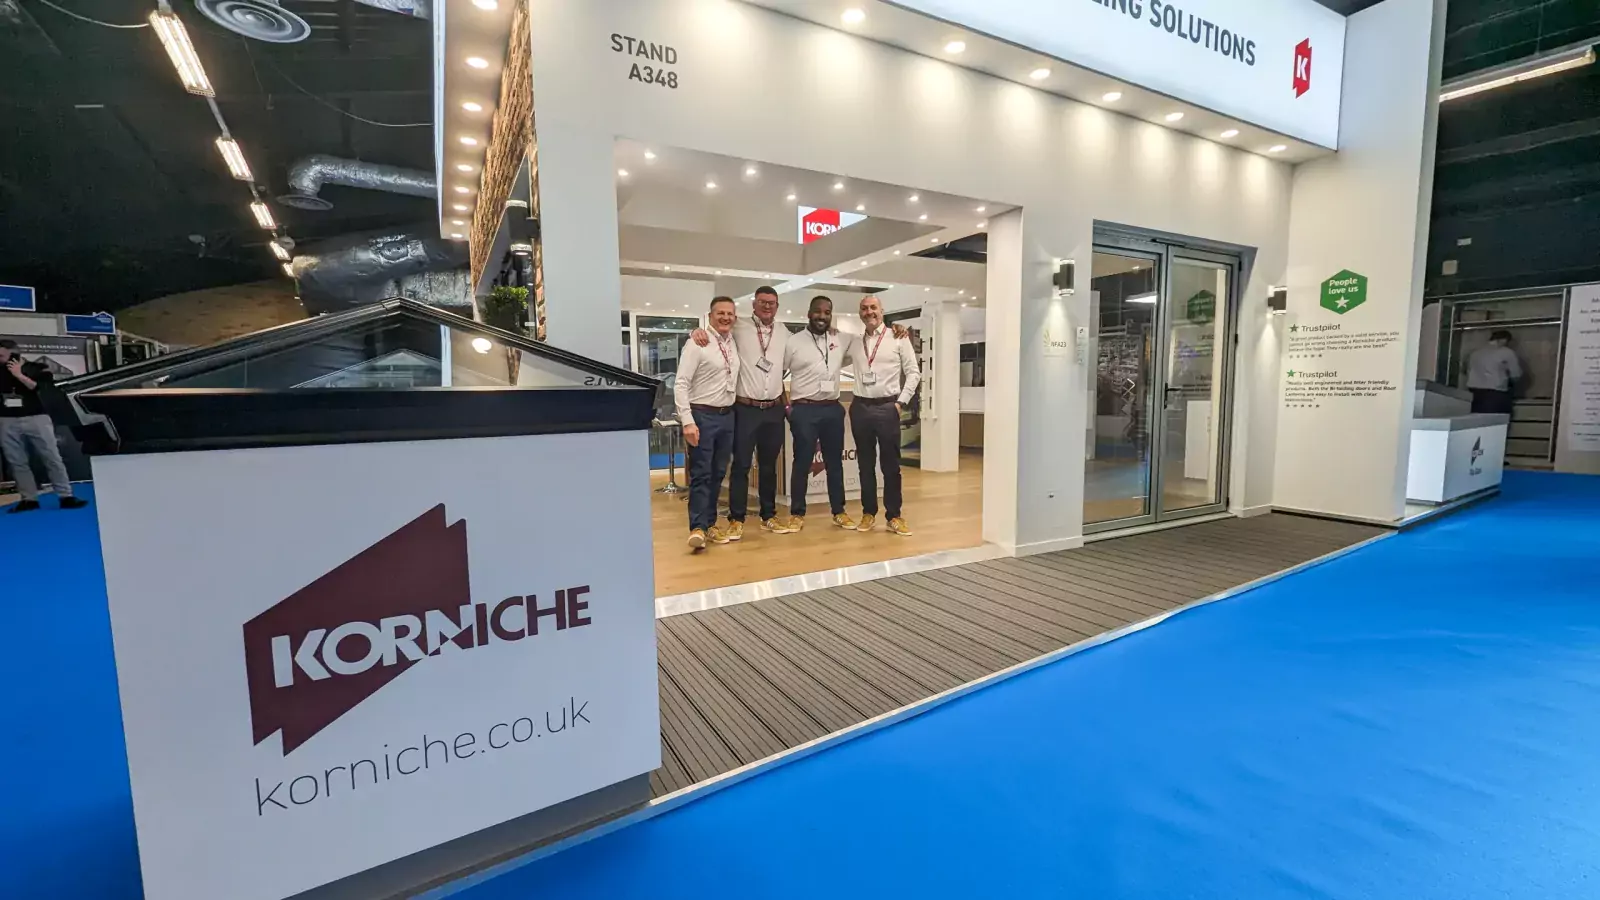 Team Korniche on the Korniche Stand A348 at the Harrogate Homebuilding & Renovating Show 2023